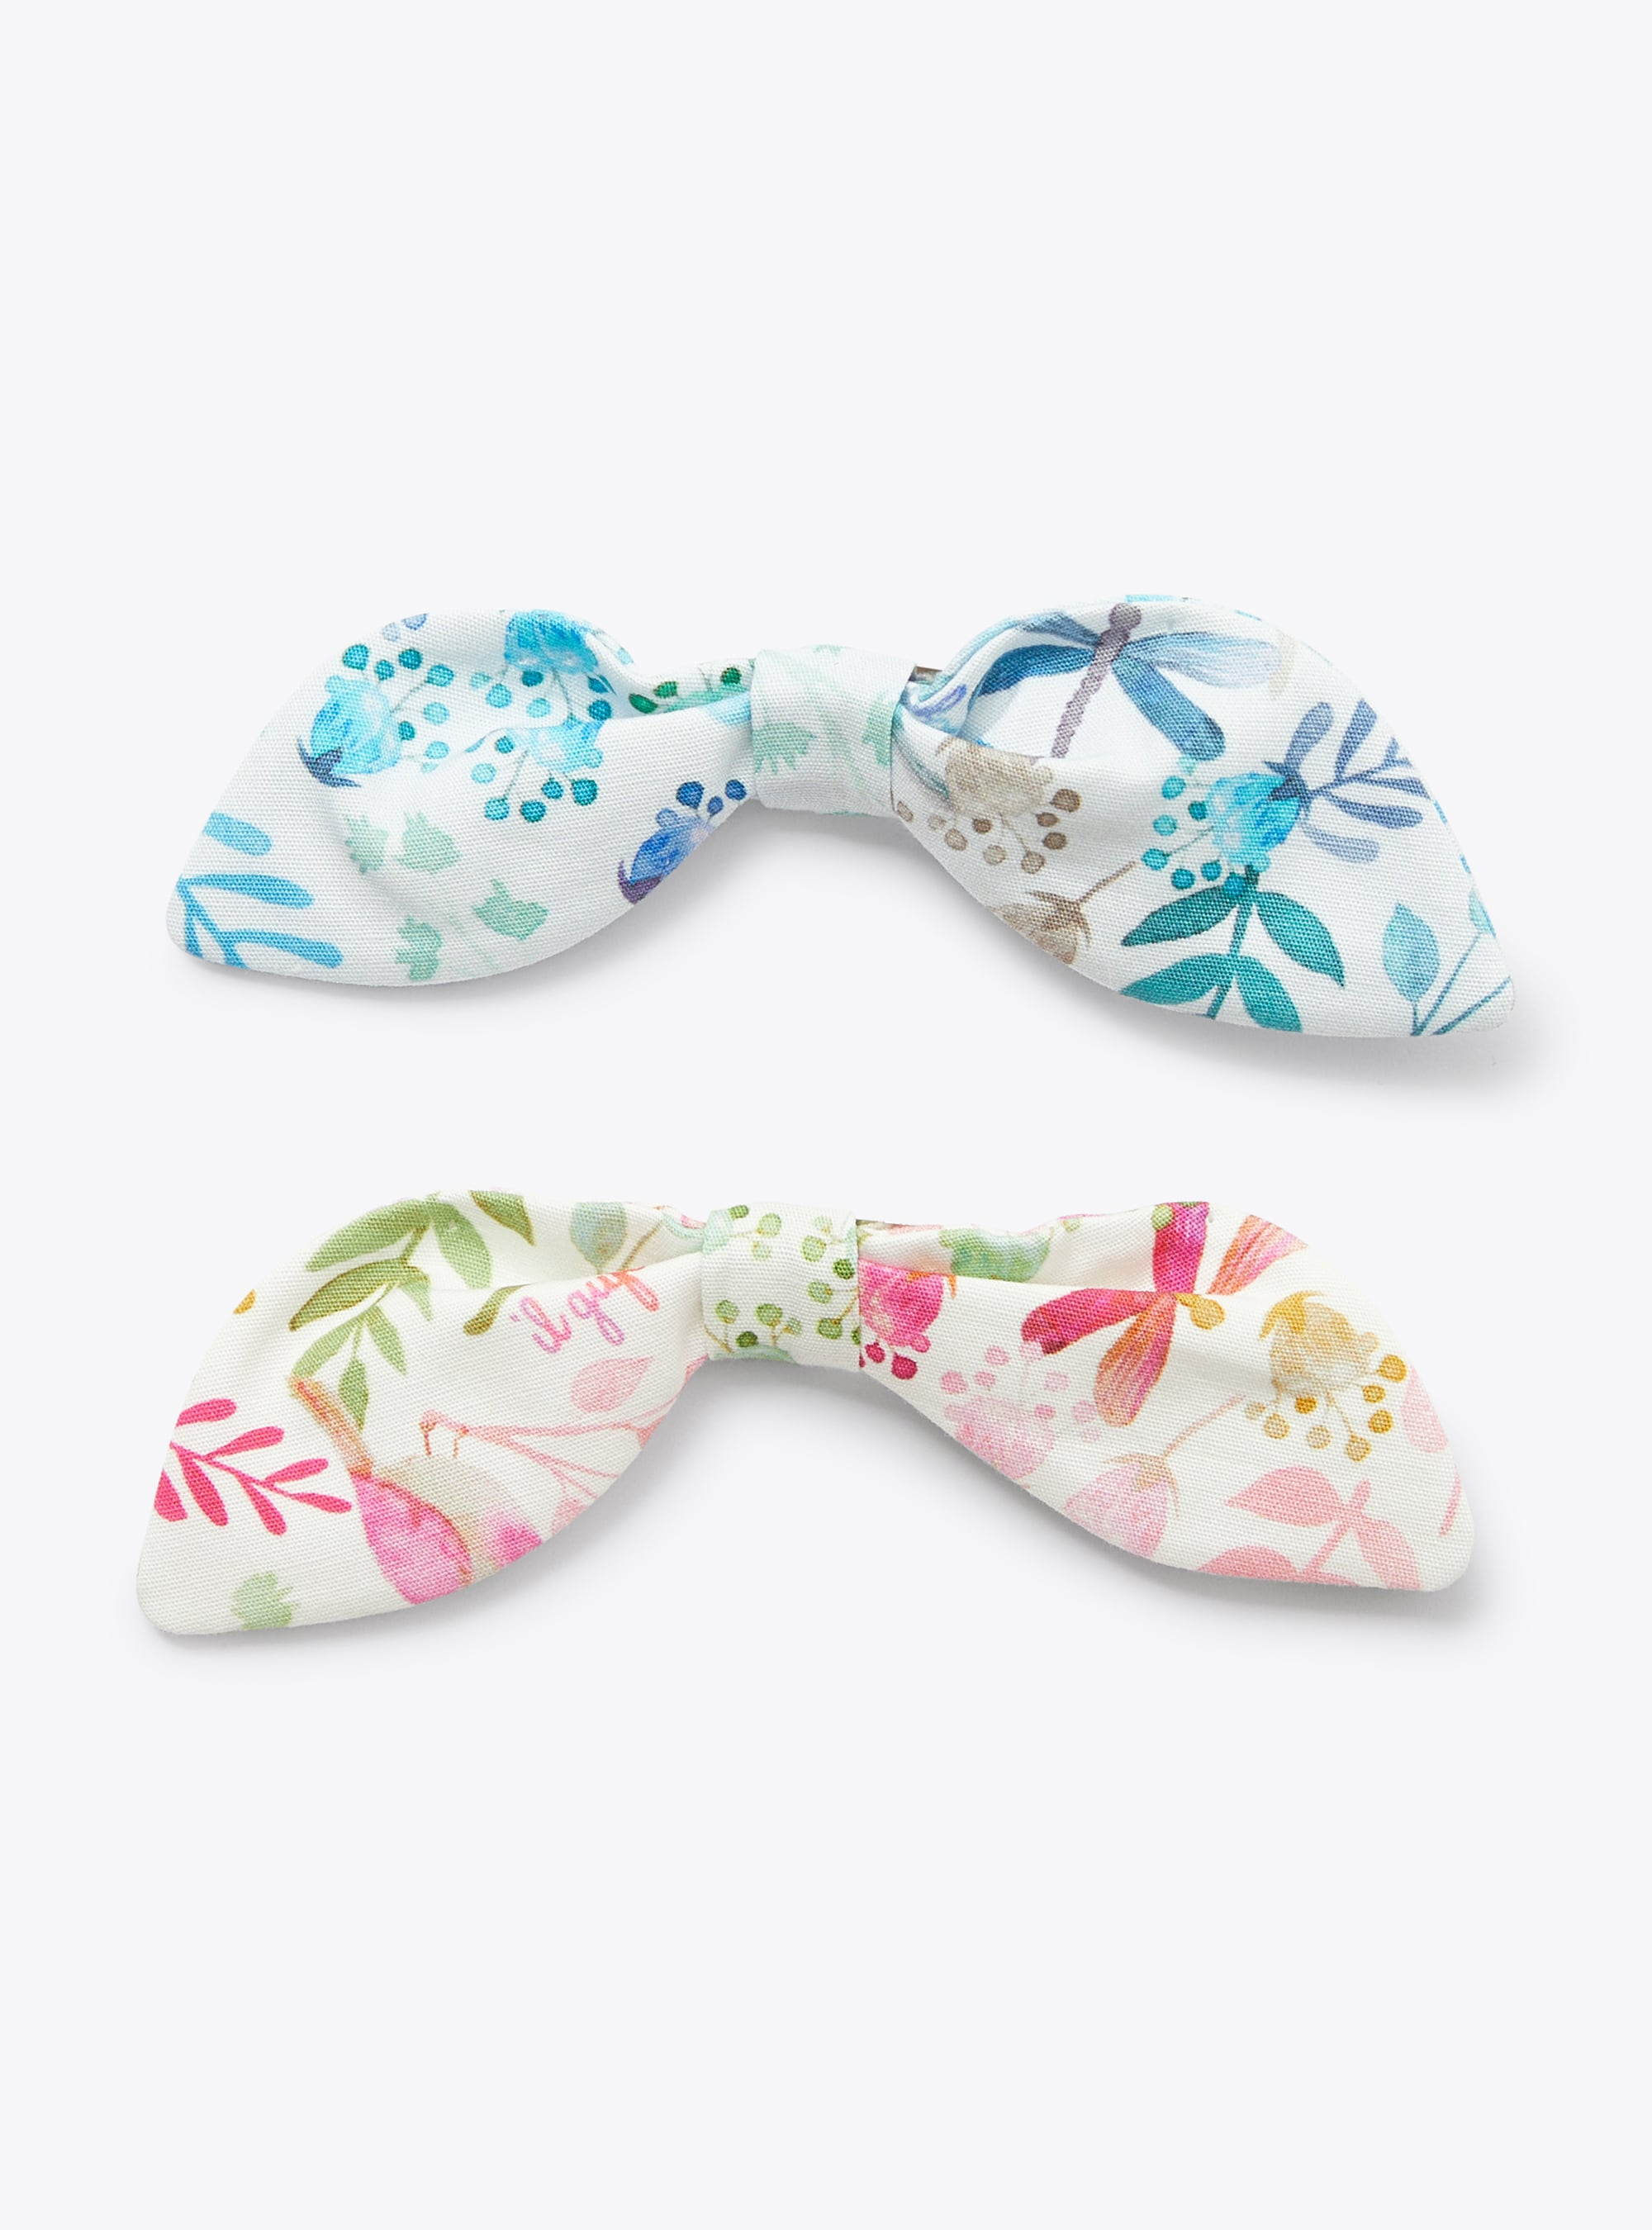 Hair clips with bow detail in an exclusive print - Accessories - Il Gufo